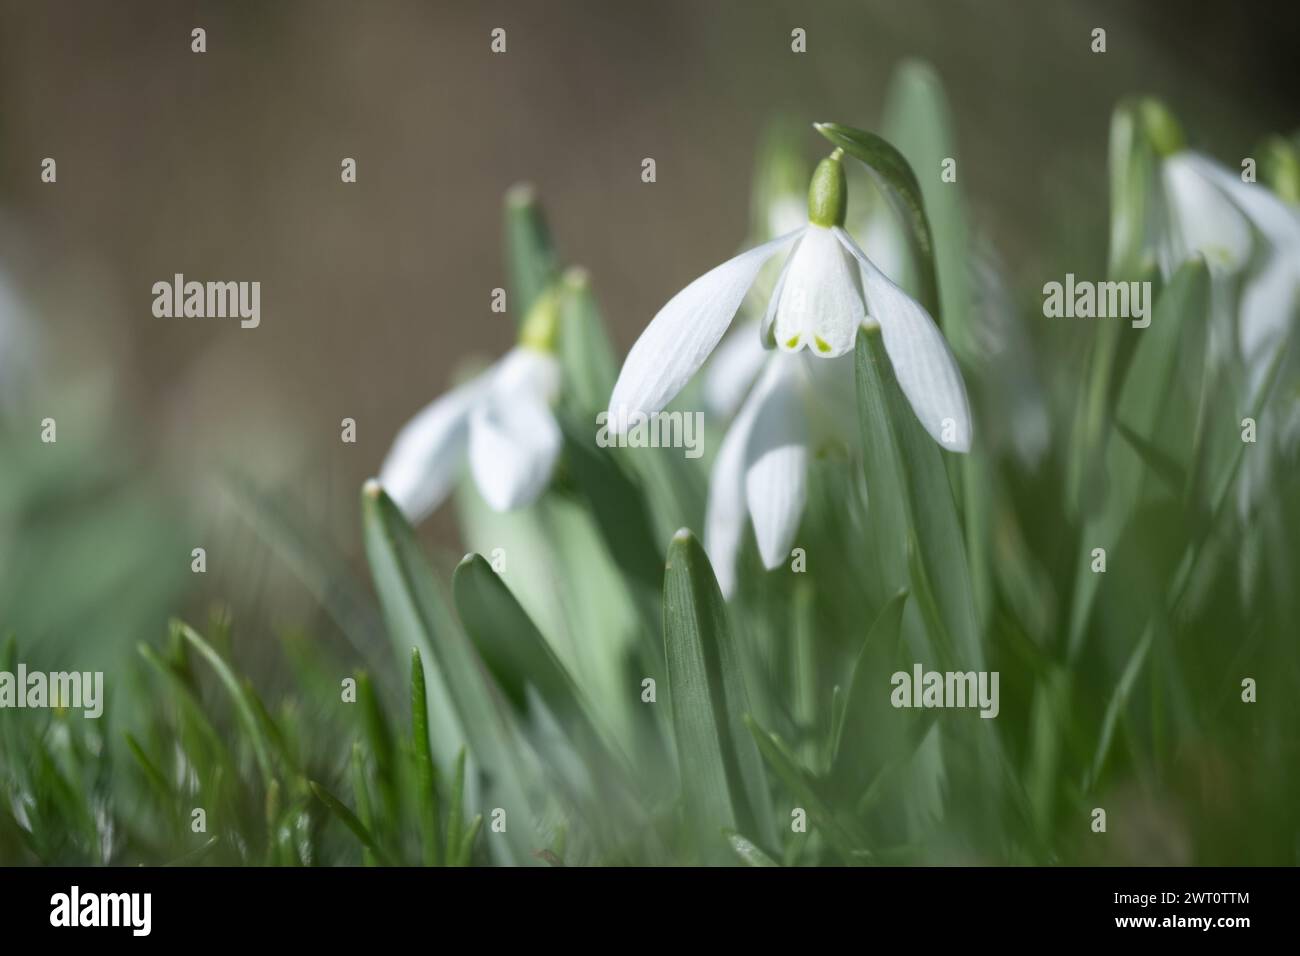 Delicate white snowdrop flowers in early spring garden. Stock Photo